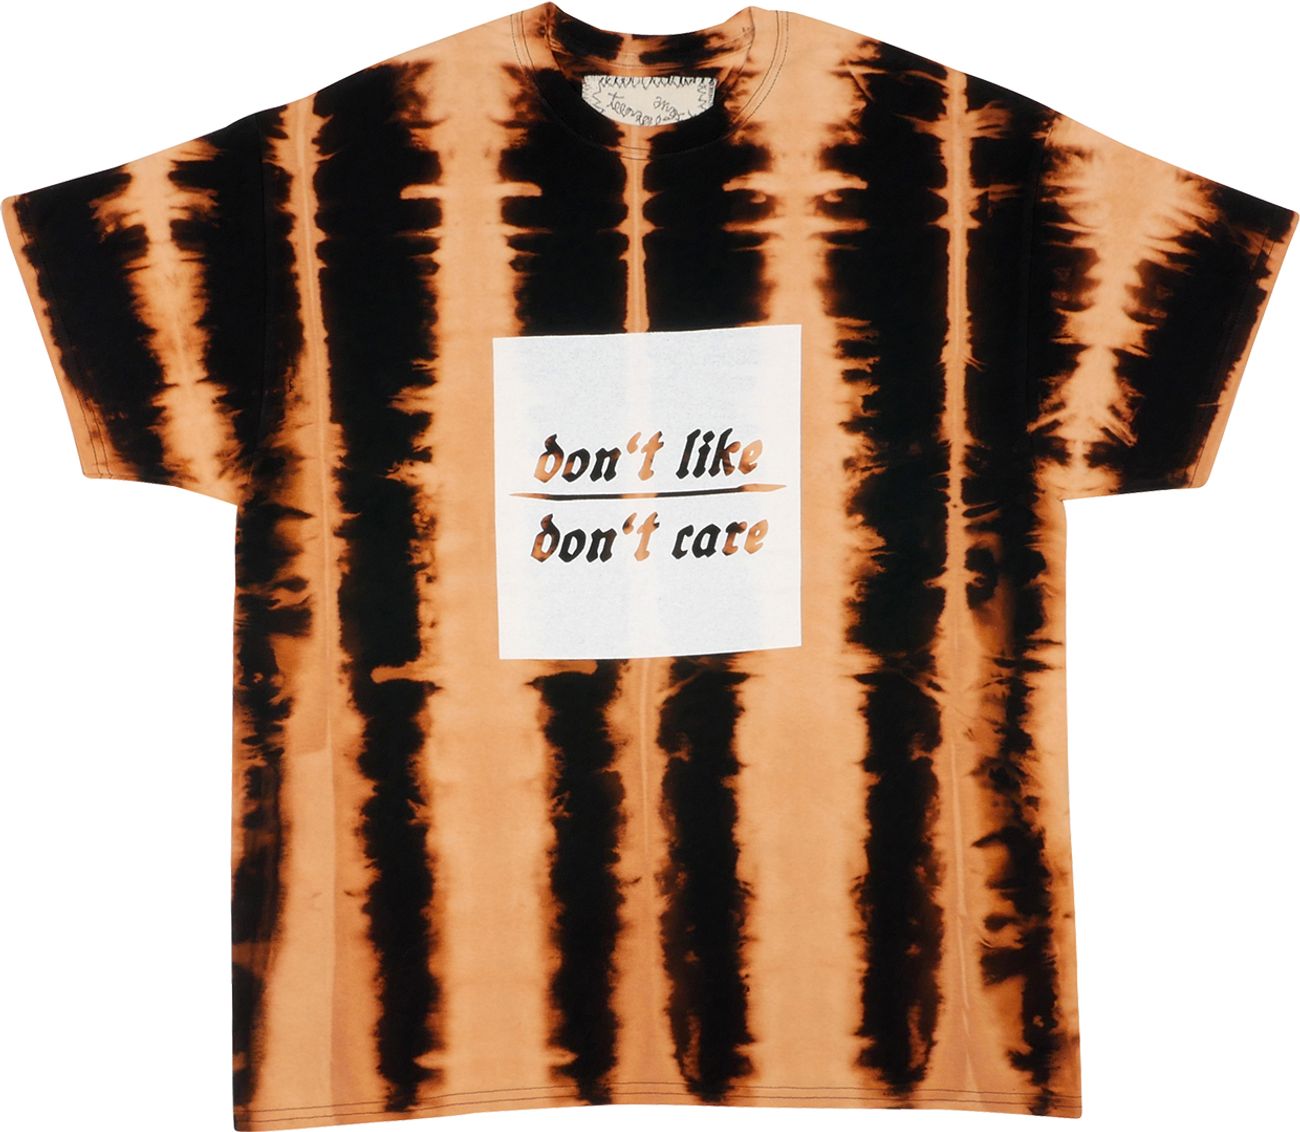 Teenage Angst "Don't like, don't care" T-Shirt - tie bleach vertical